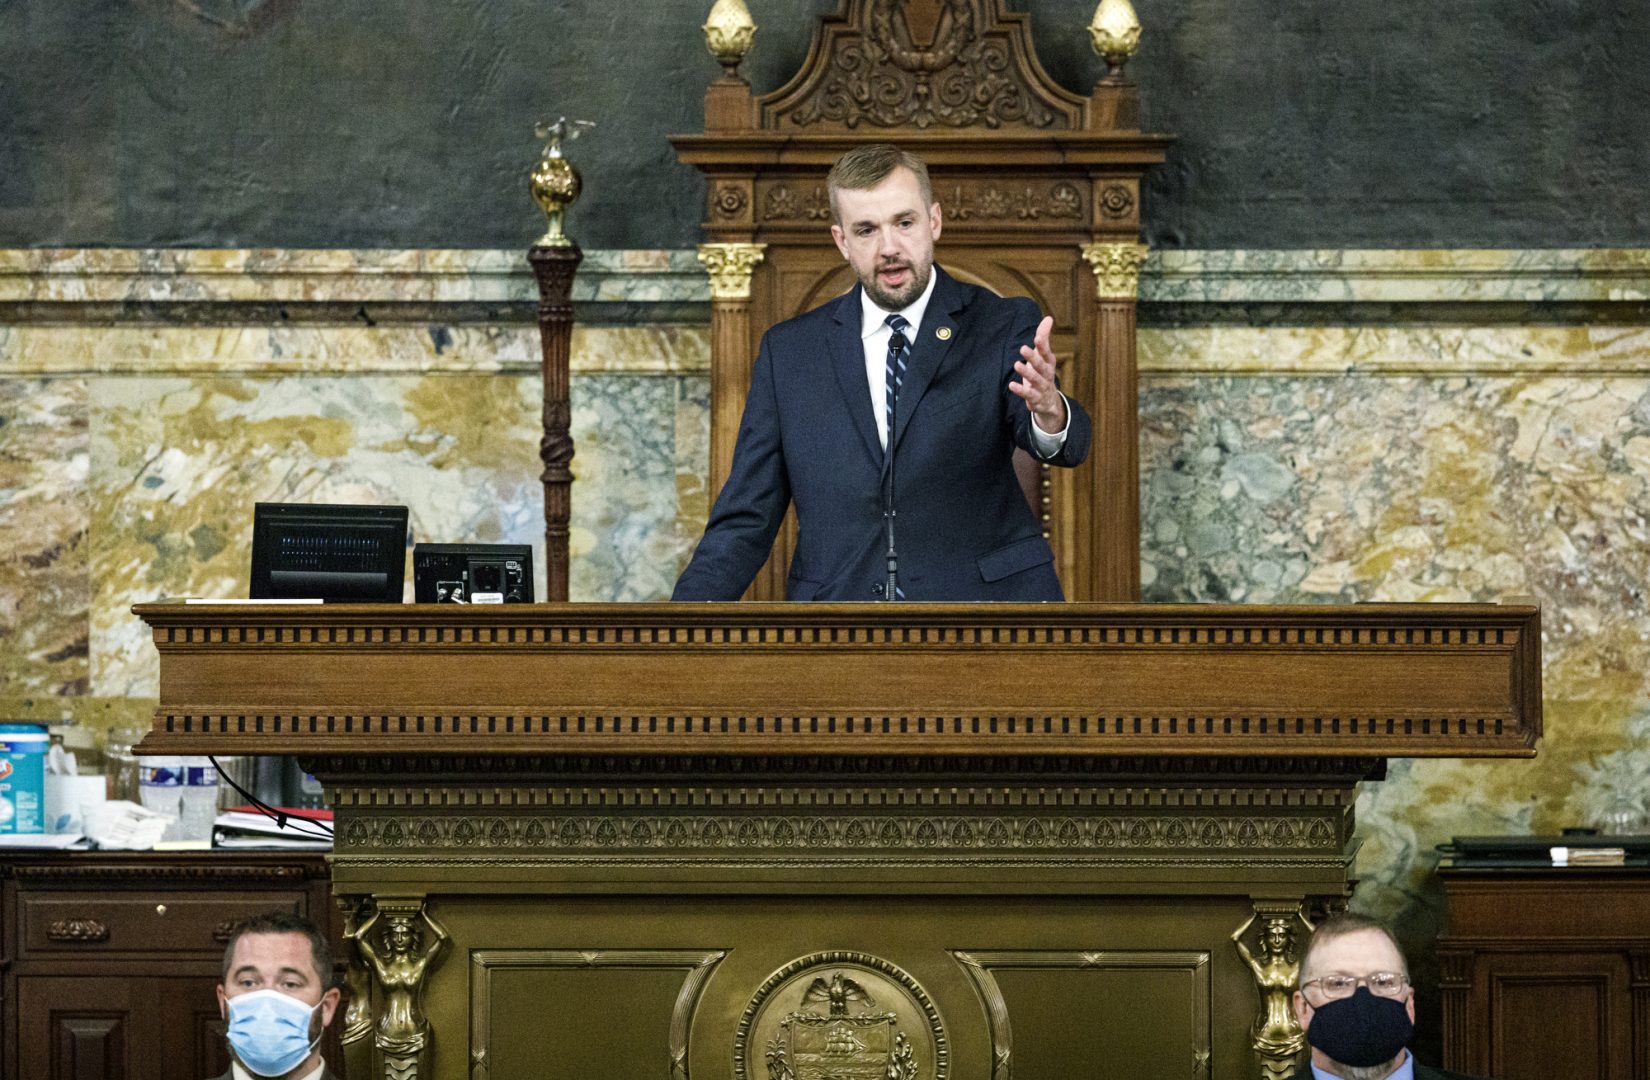 State Rep. Bryan Cutler, R-Lancaster County, addresses the House after being elected to serve as Pennsylvania House Speaker, June 22, 2020.